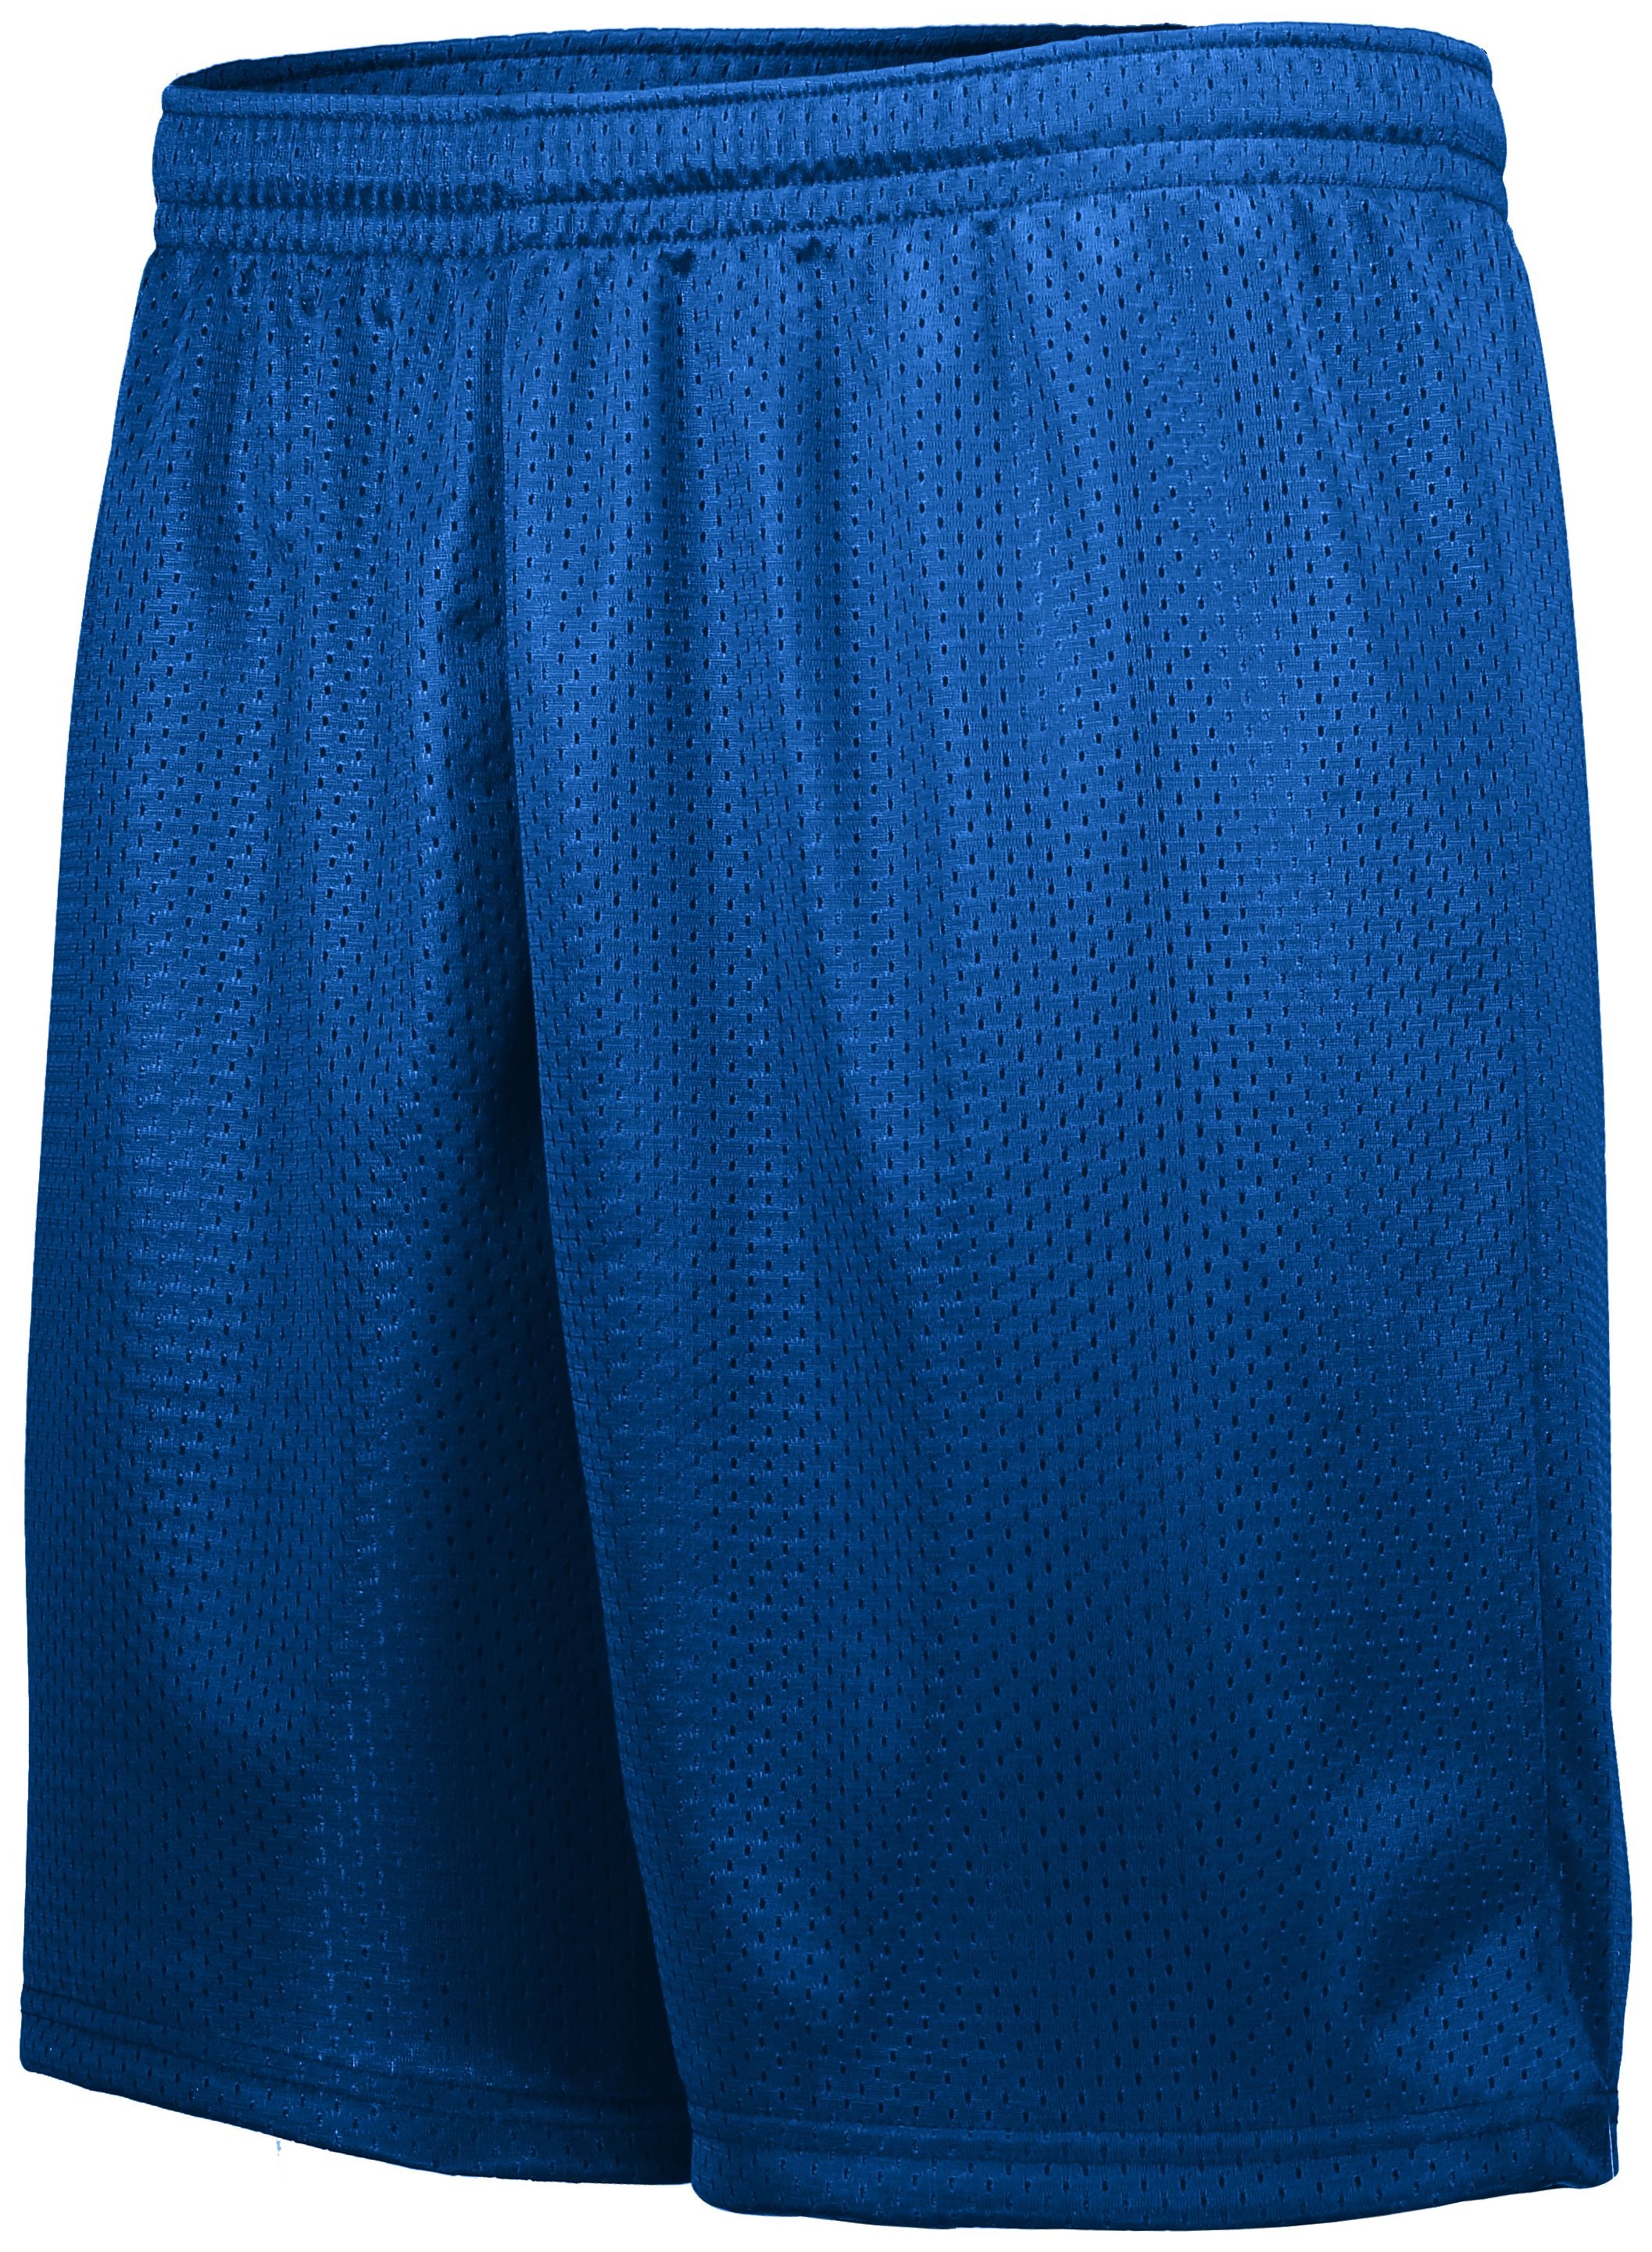 Augusta Sportswear Youth Tricot Mesh Shorts in Royal  -Part of the Youth, Youth-Shorts, Augusta-Products product lines at KanaleyCreations.com